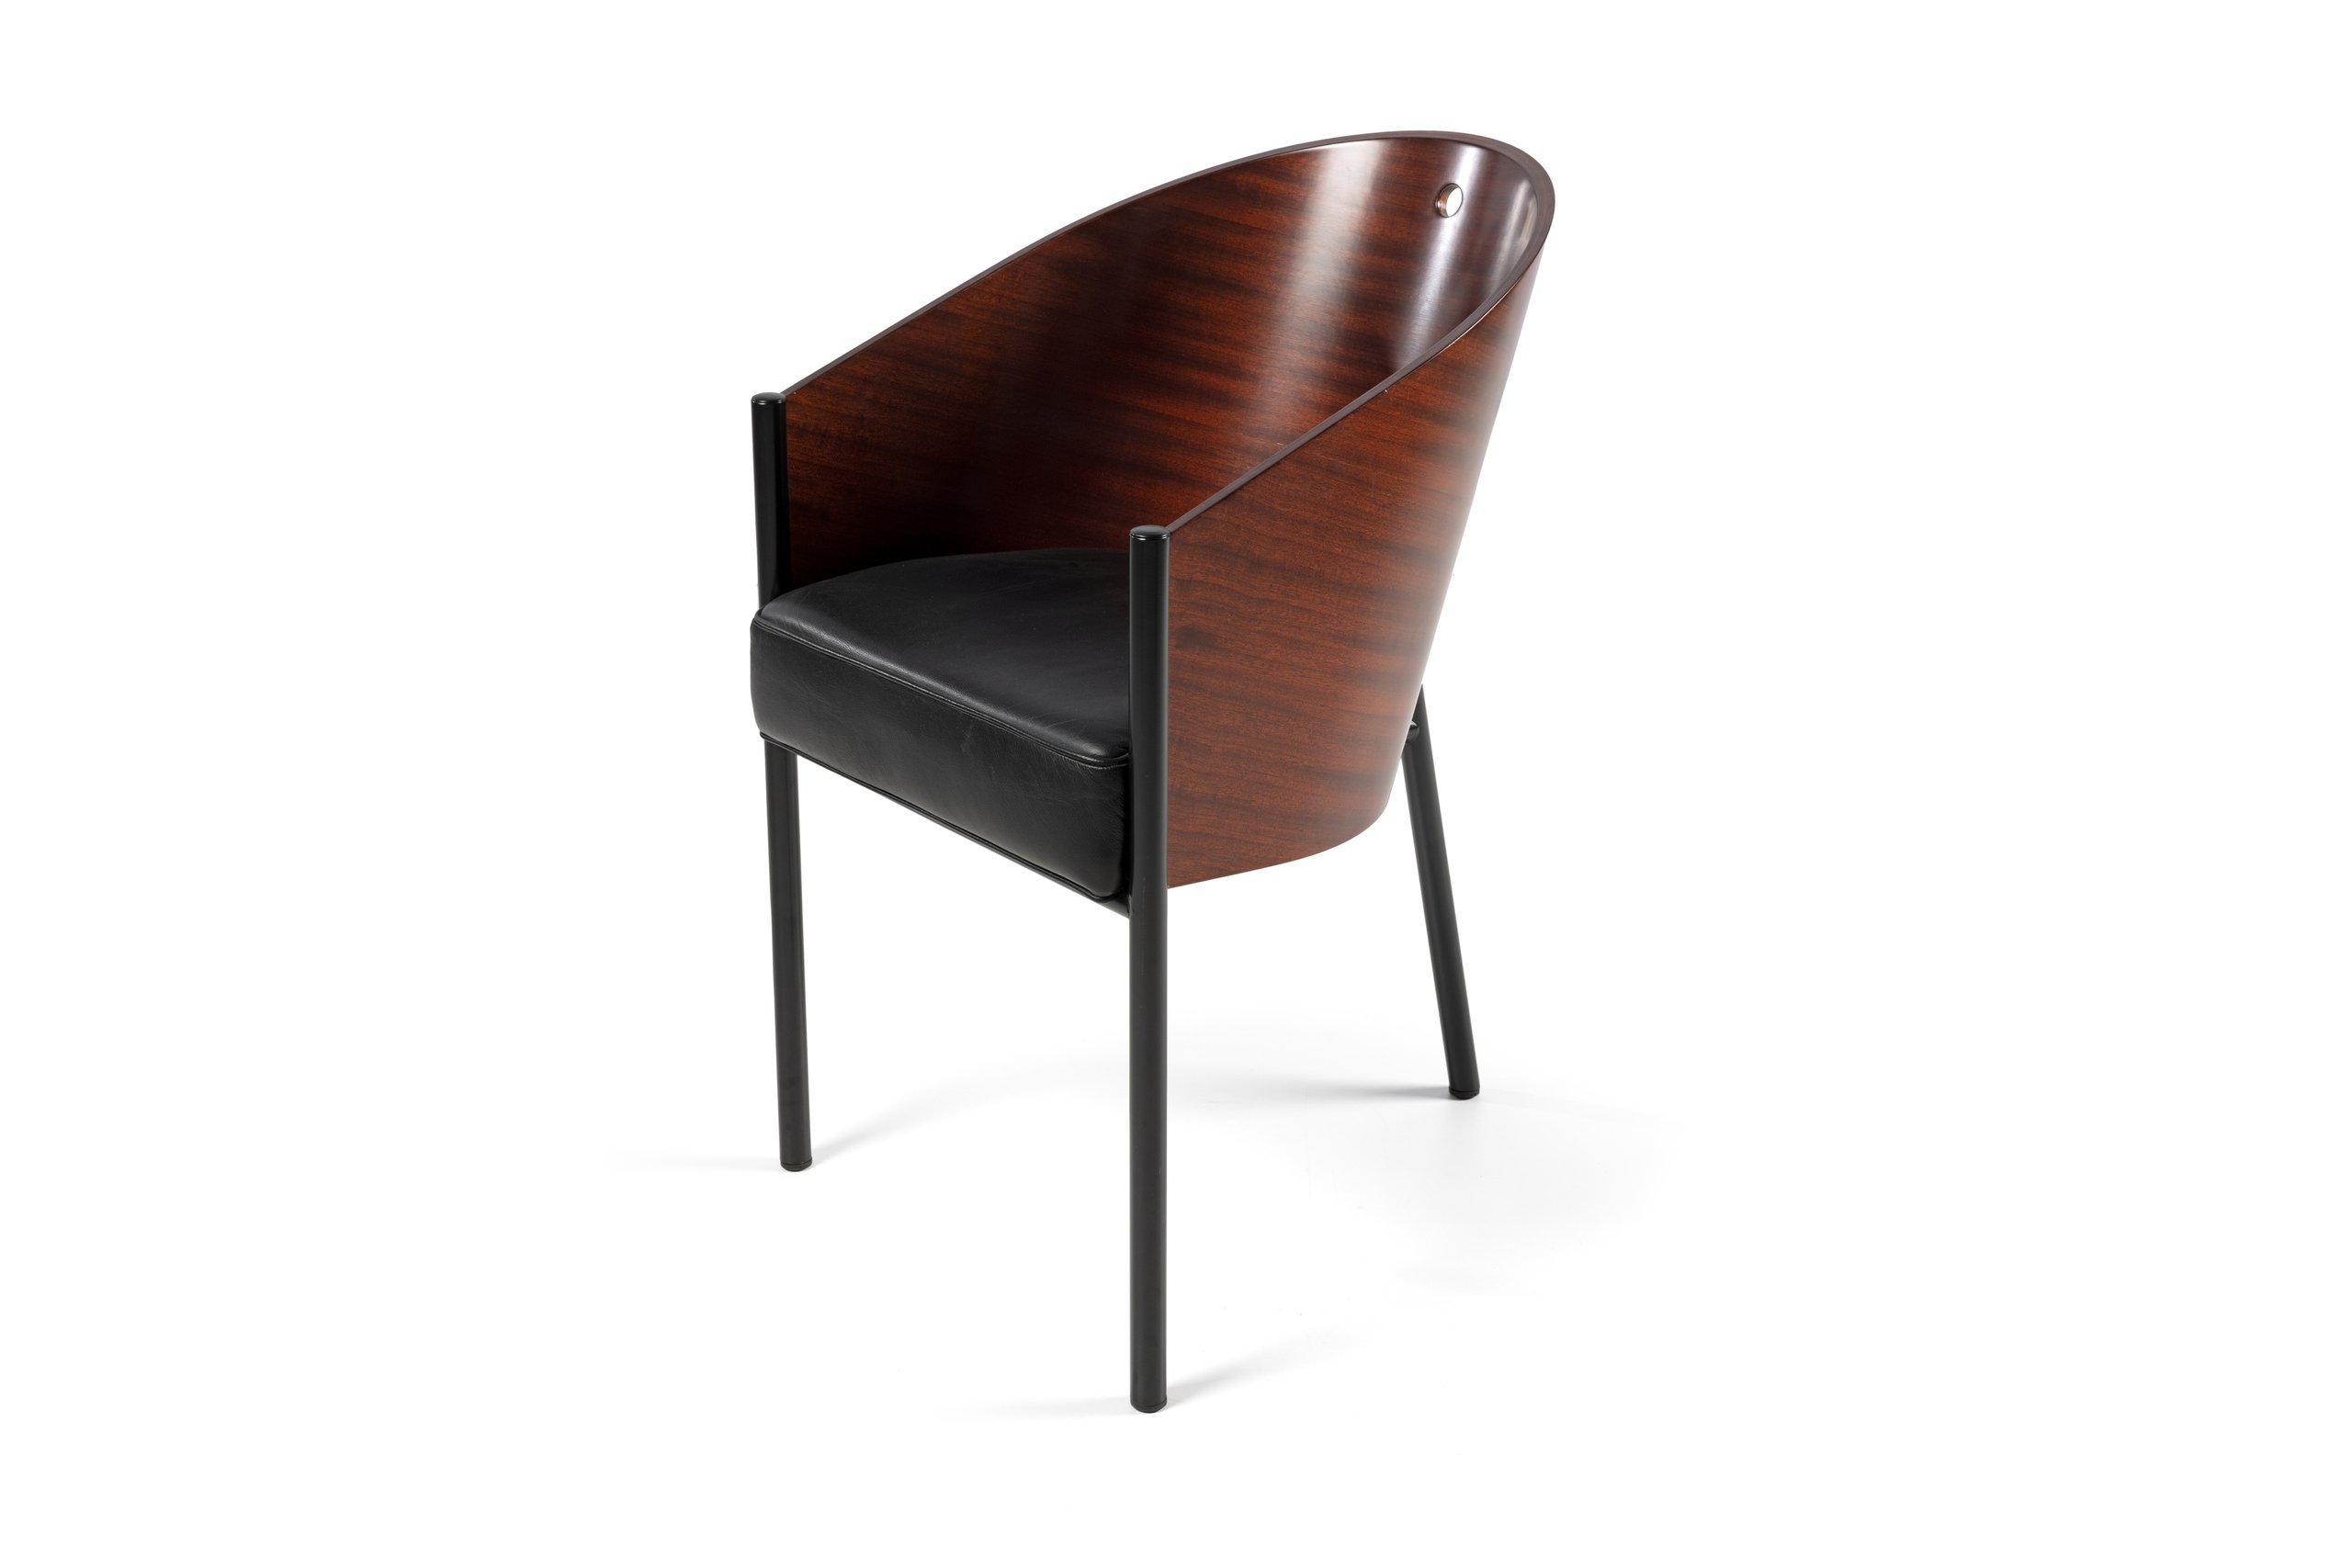 Powerhouse Collection - Cafe Costes chair by Philippe Starck